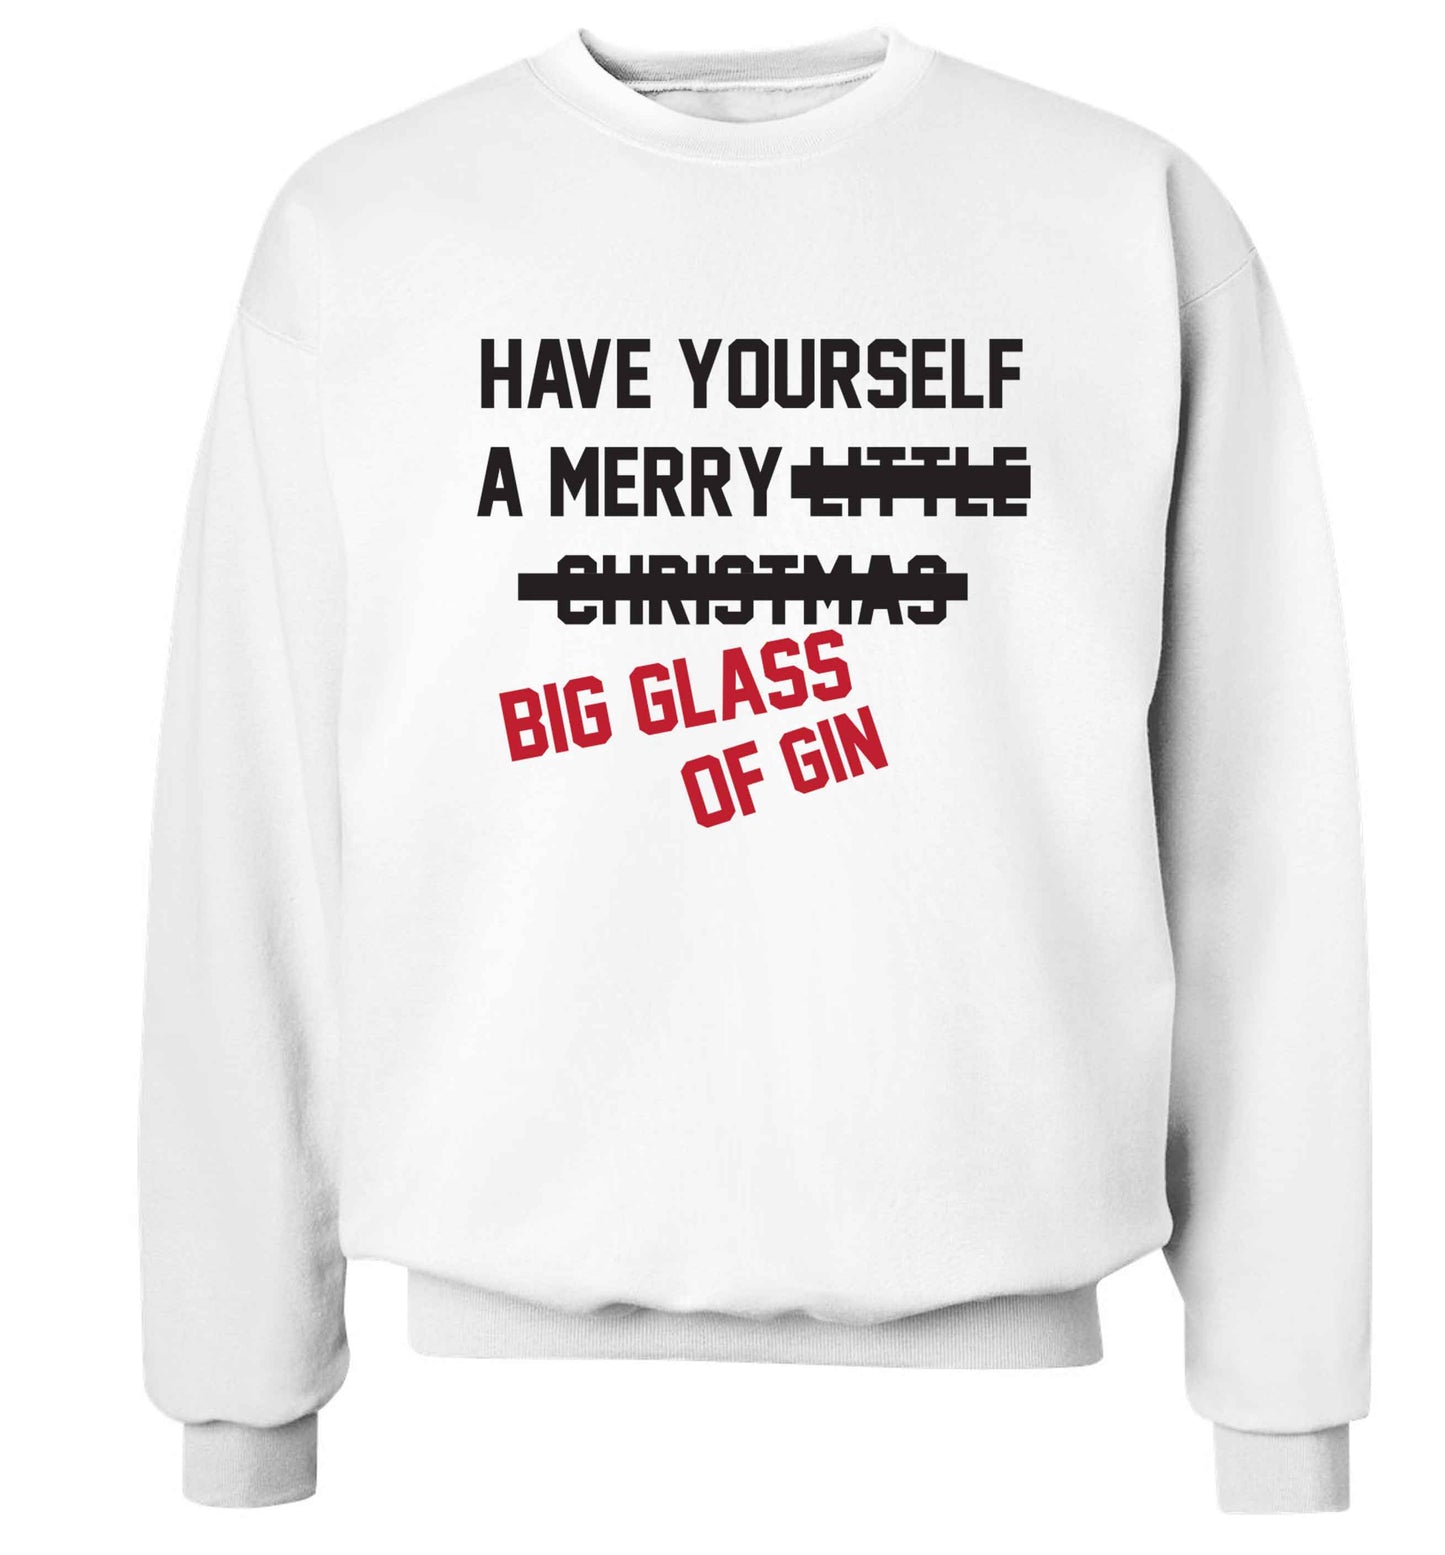 Have yourself a merry big glass of gin Adult's unisex white Sweater 2XL